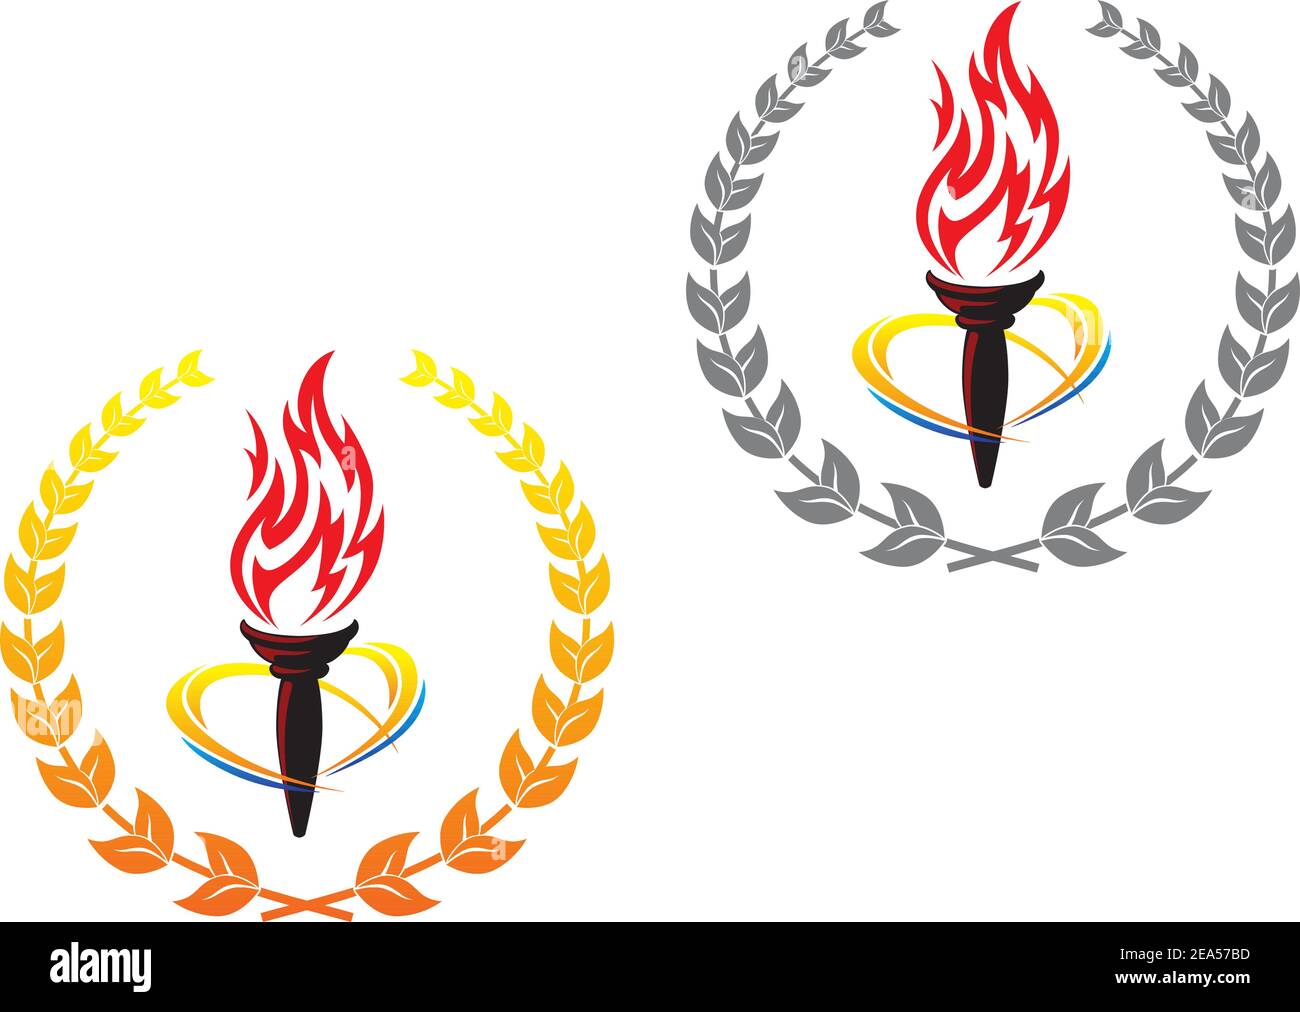 Flaming torches in laurel wreathes for peace concept design Stock Vector